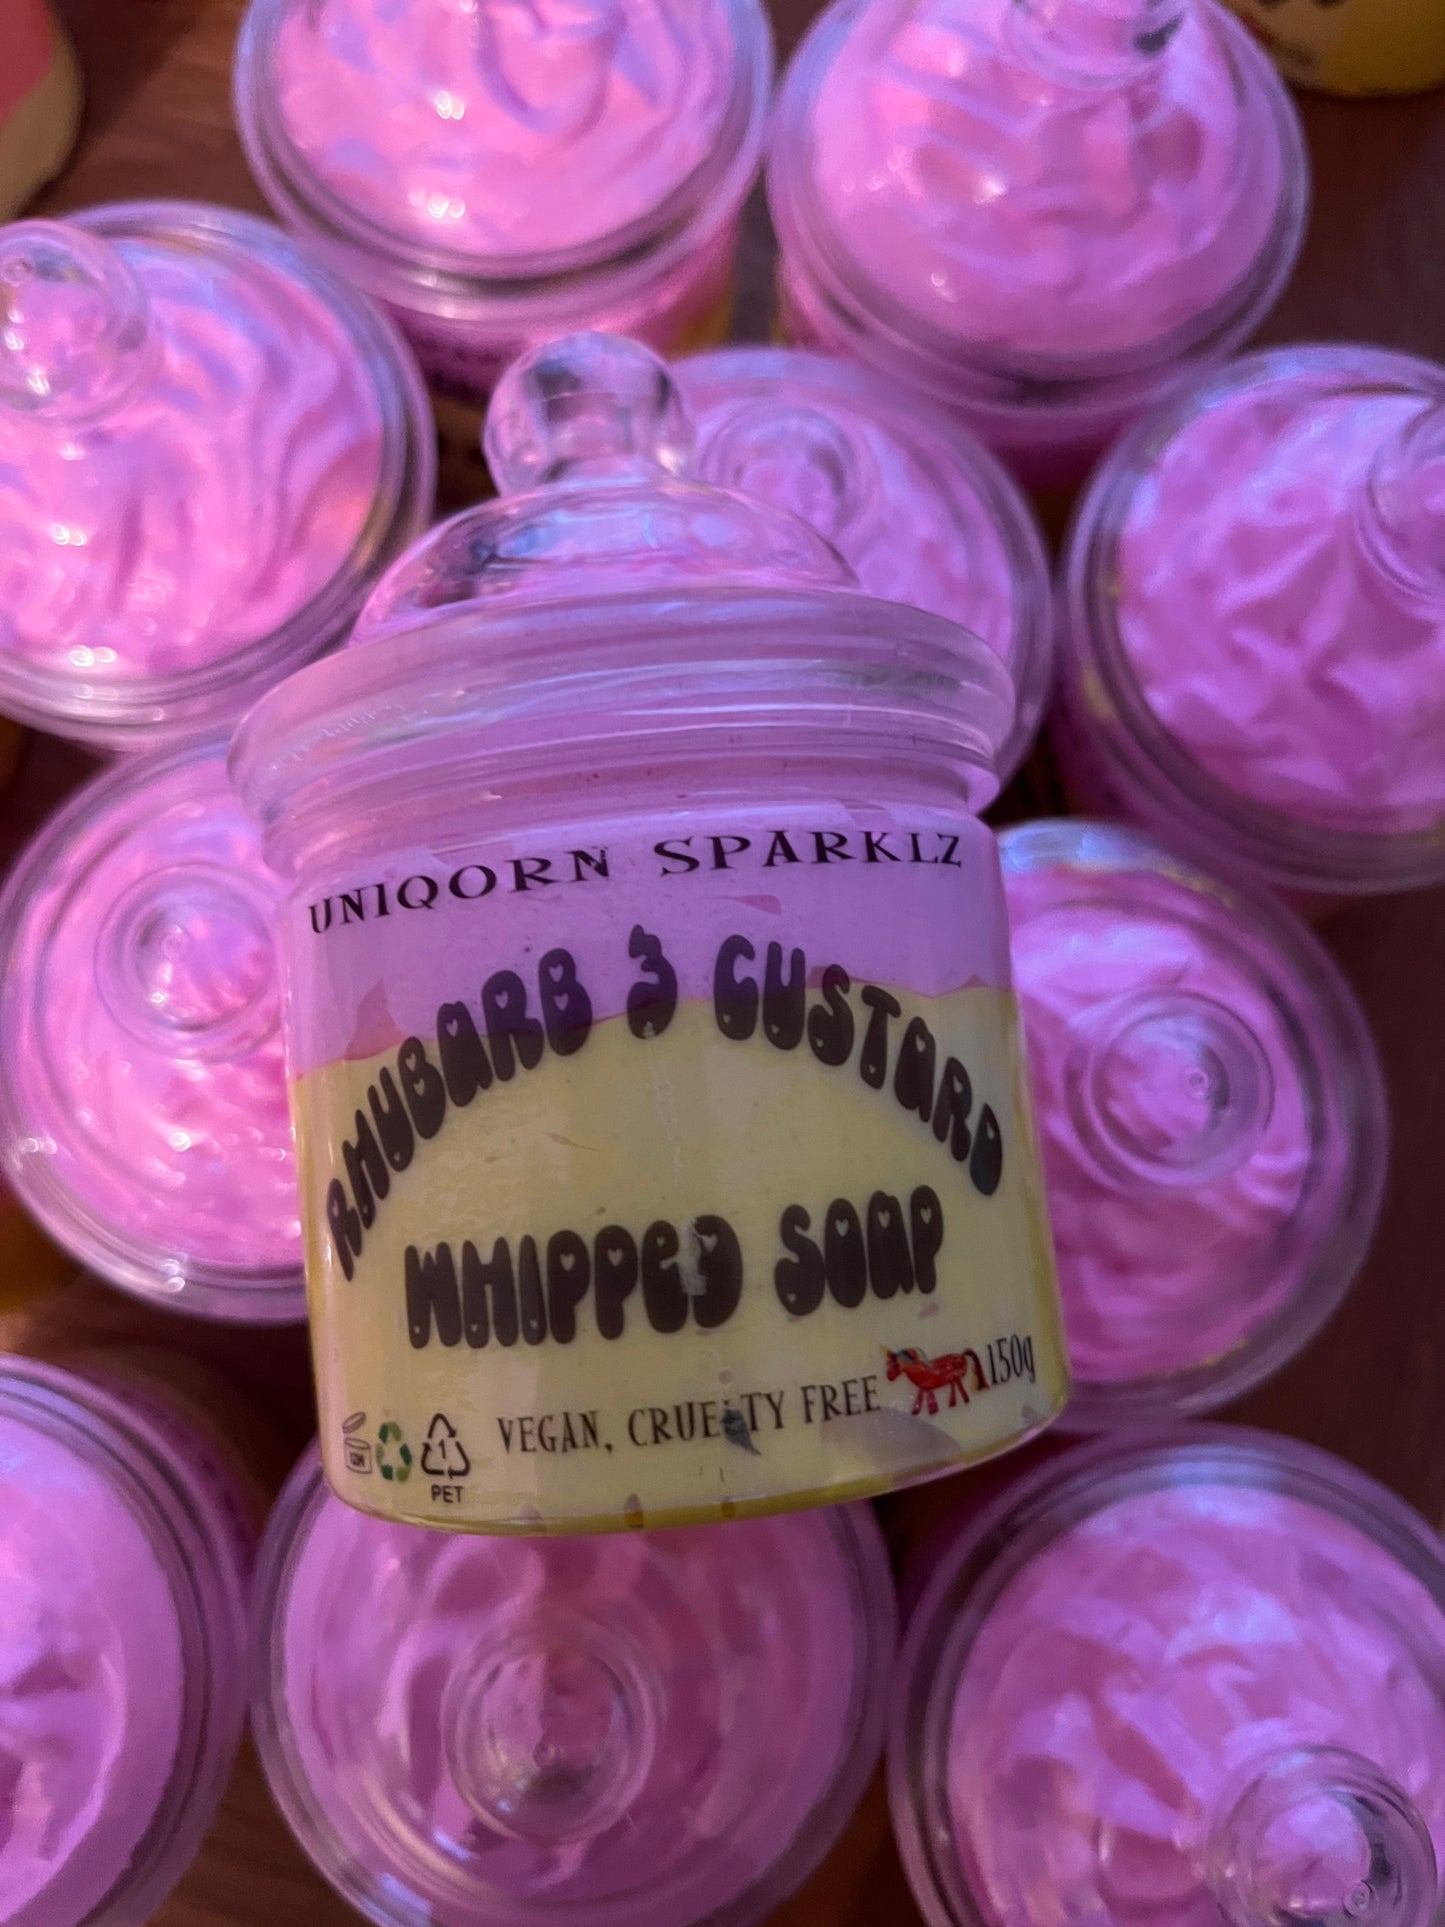 WHIPPED SOAP (VOL3)